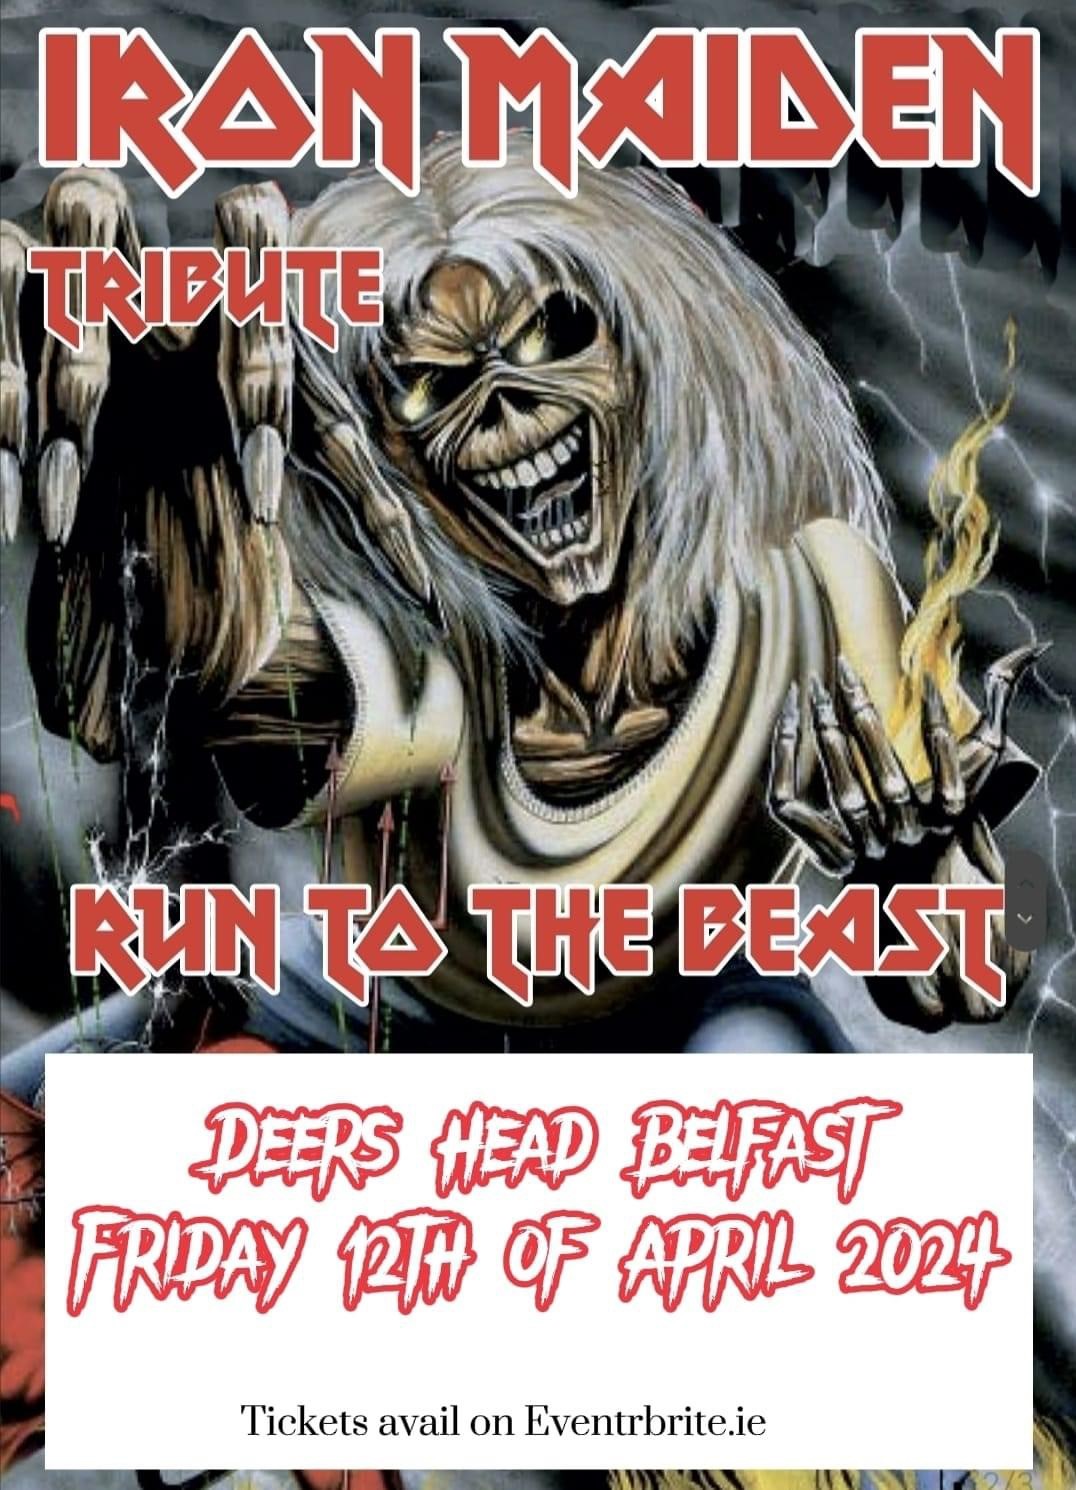 RUN TO THE BEAST - THE ULTIMATE IRON MAIDEN TRIBUTE